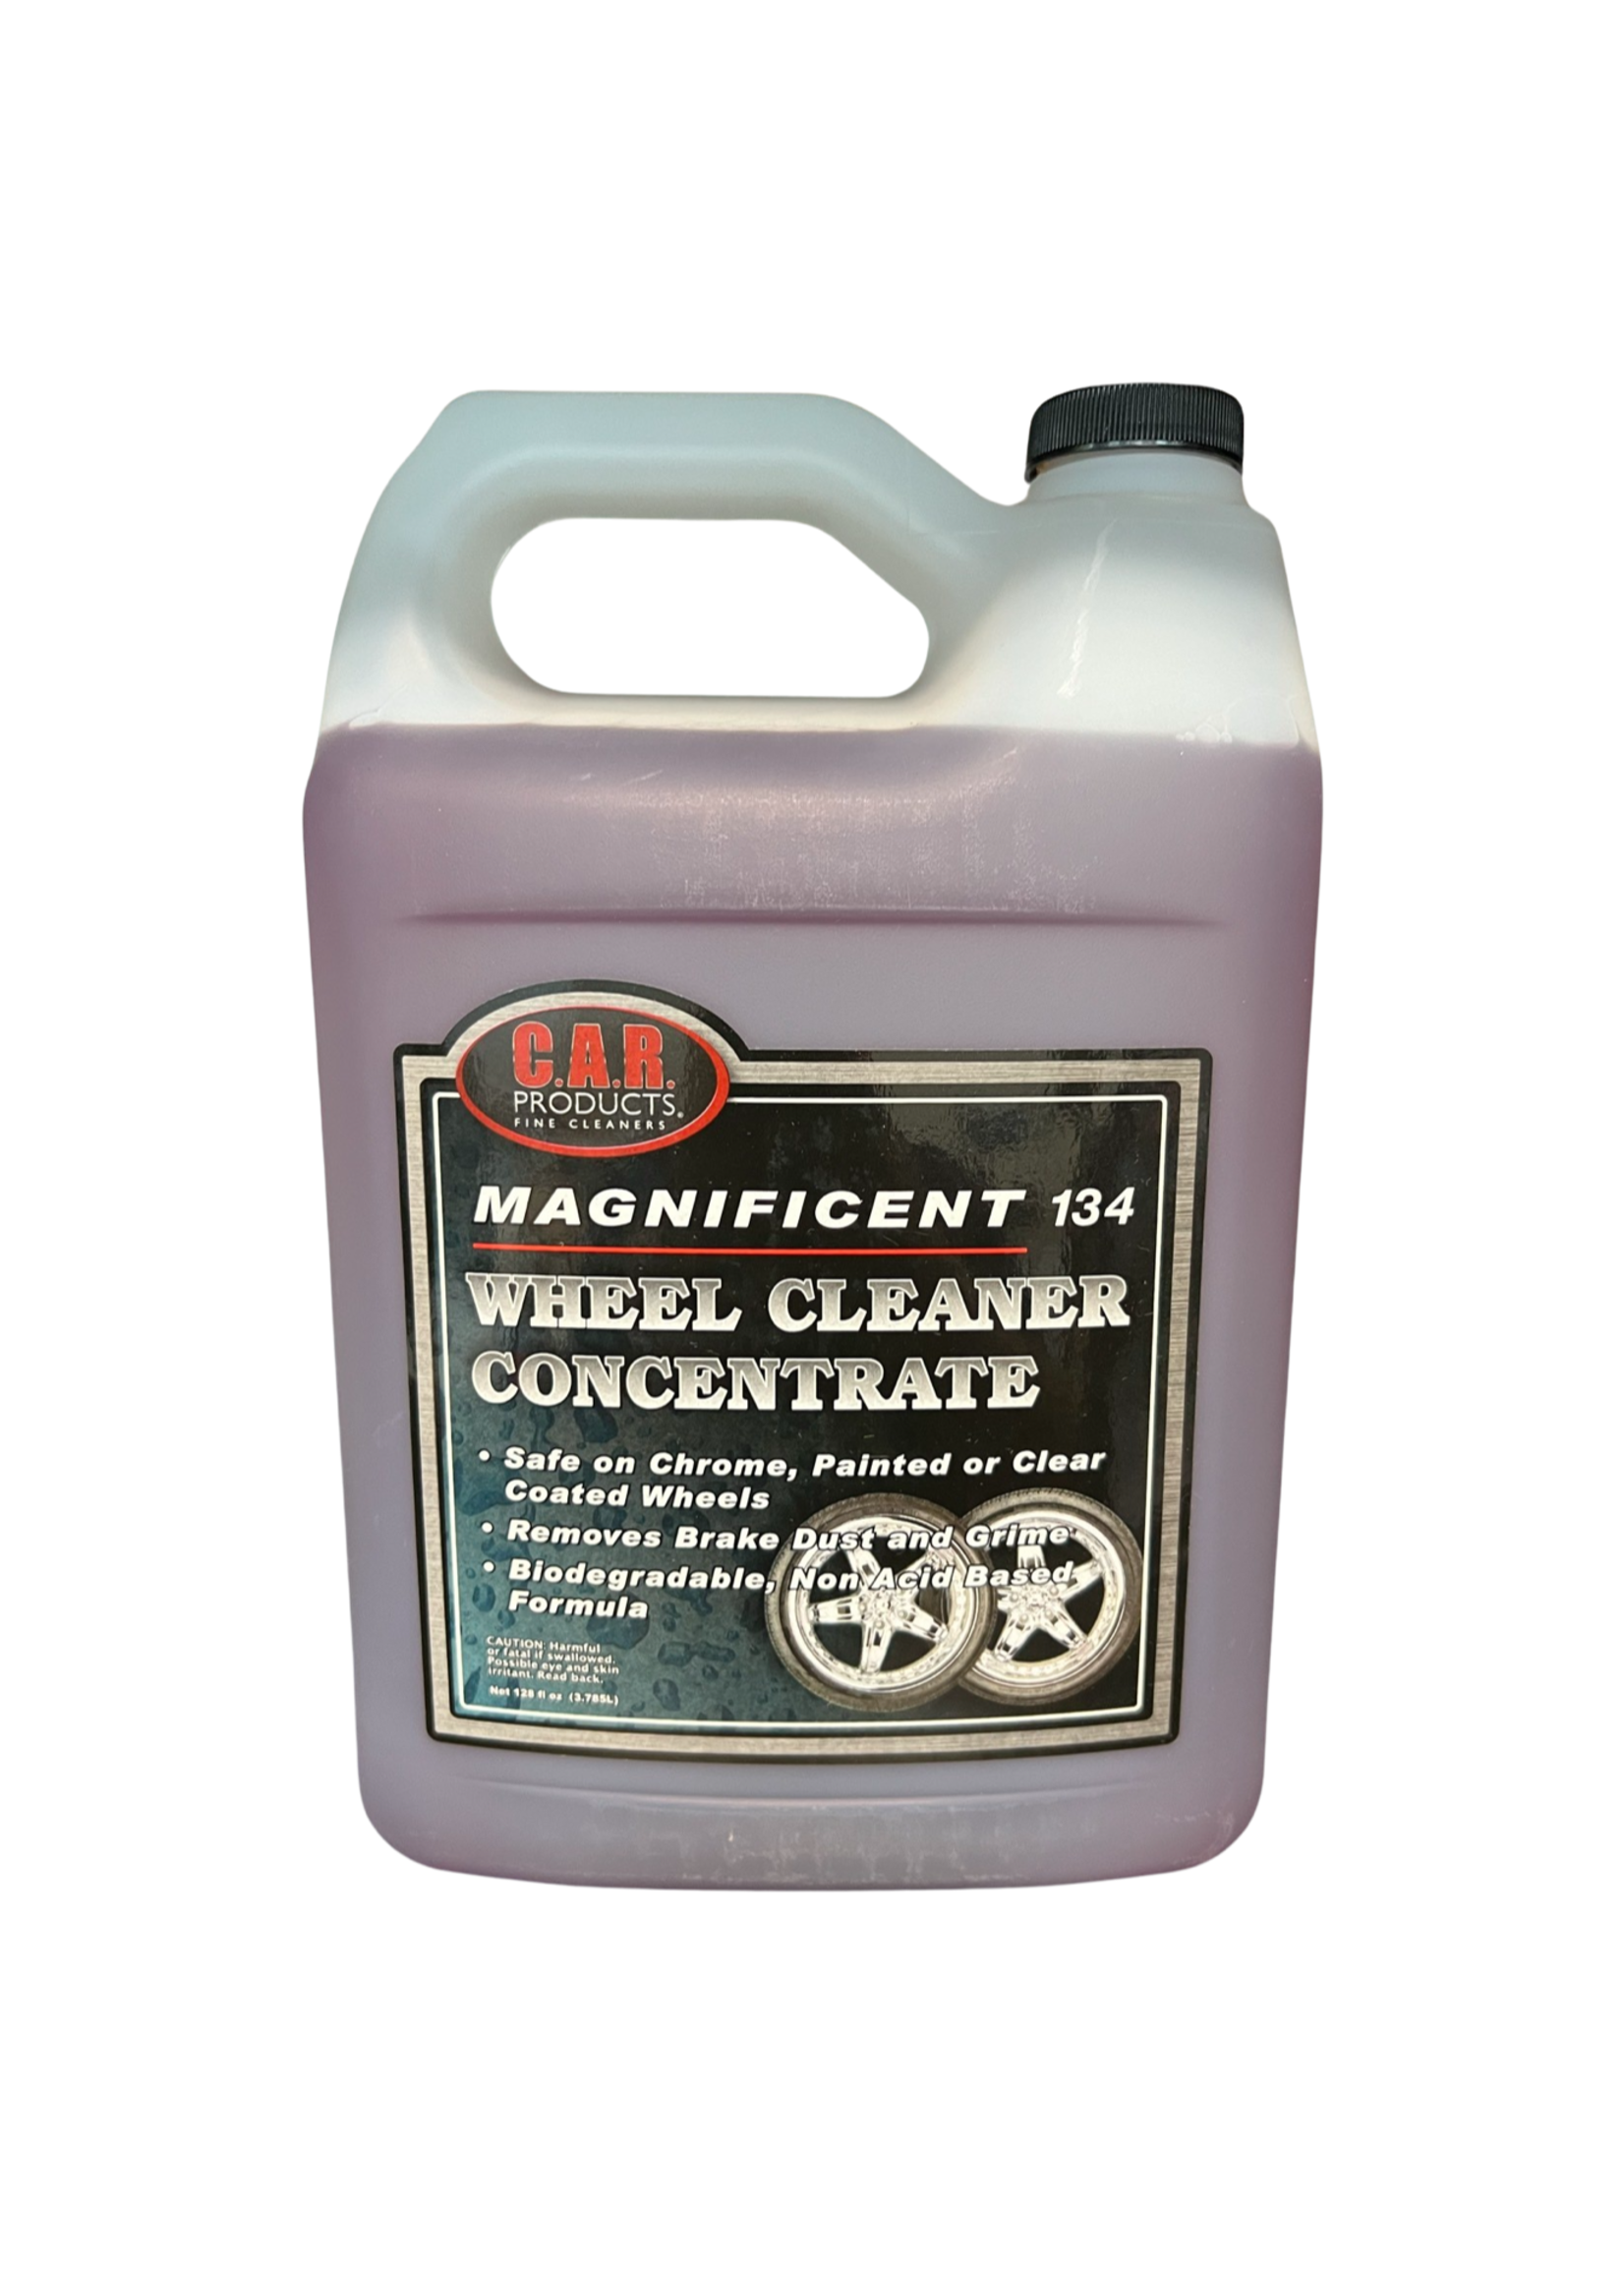 CAR Products Magnificent Wheel Cleaner Concentrate